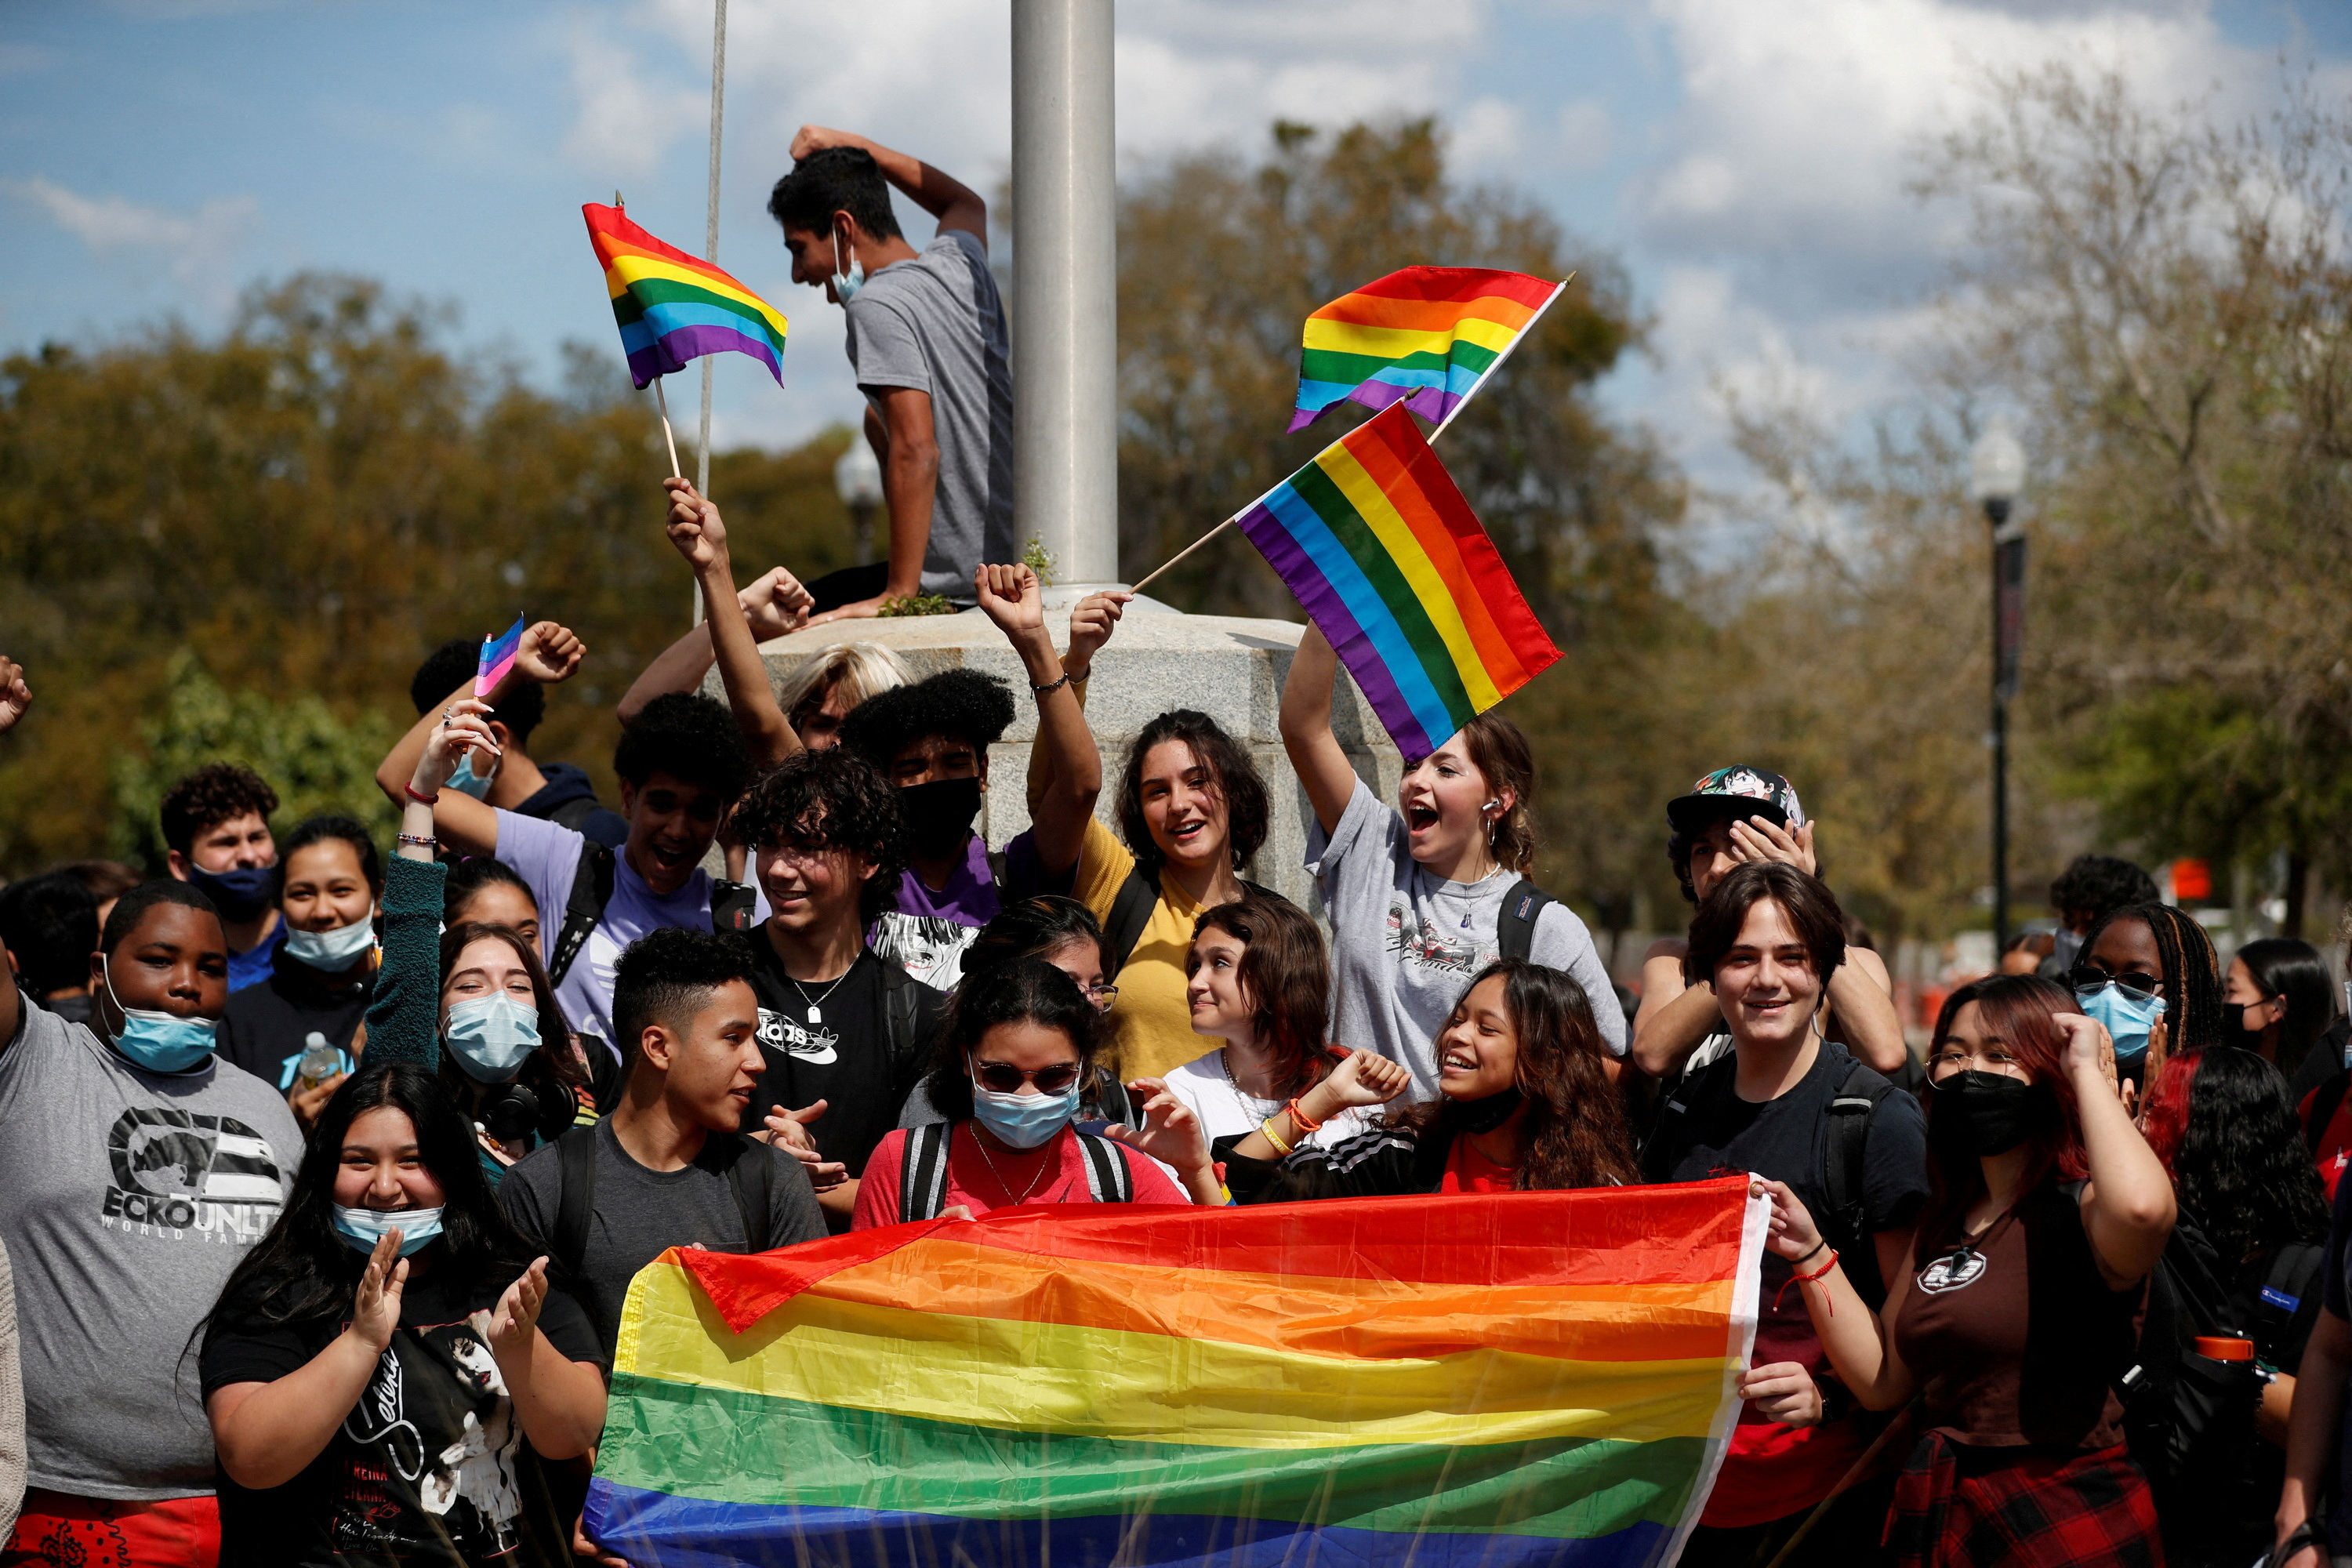 Florida education board extends ban on gender identity lessons to all